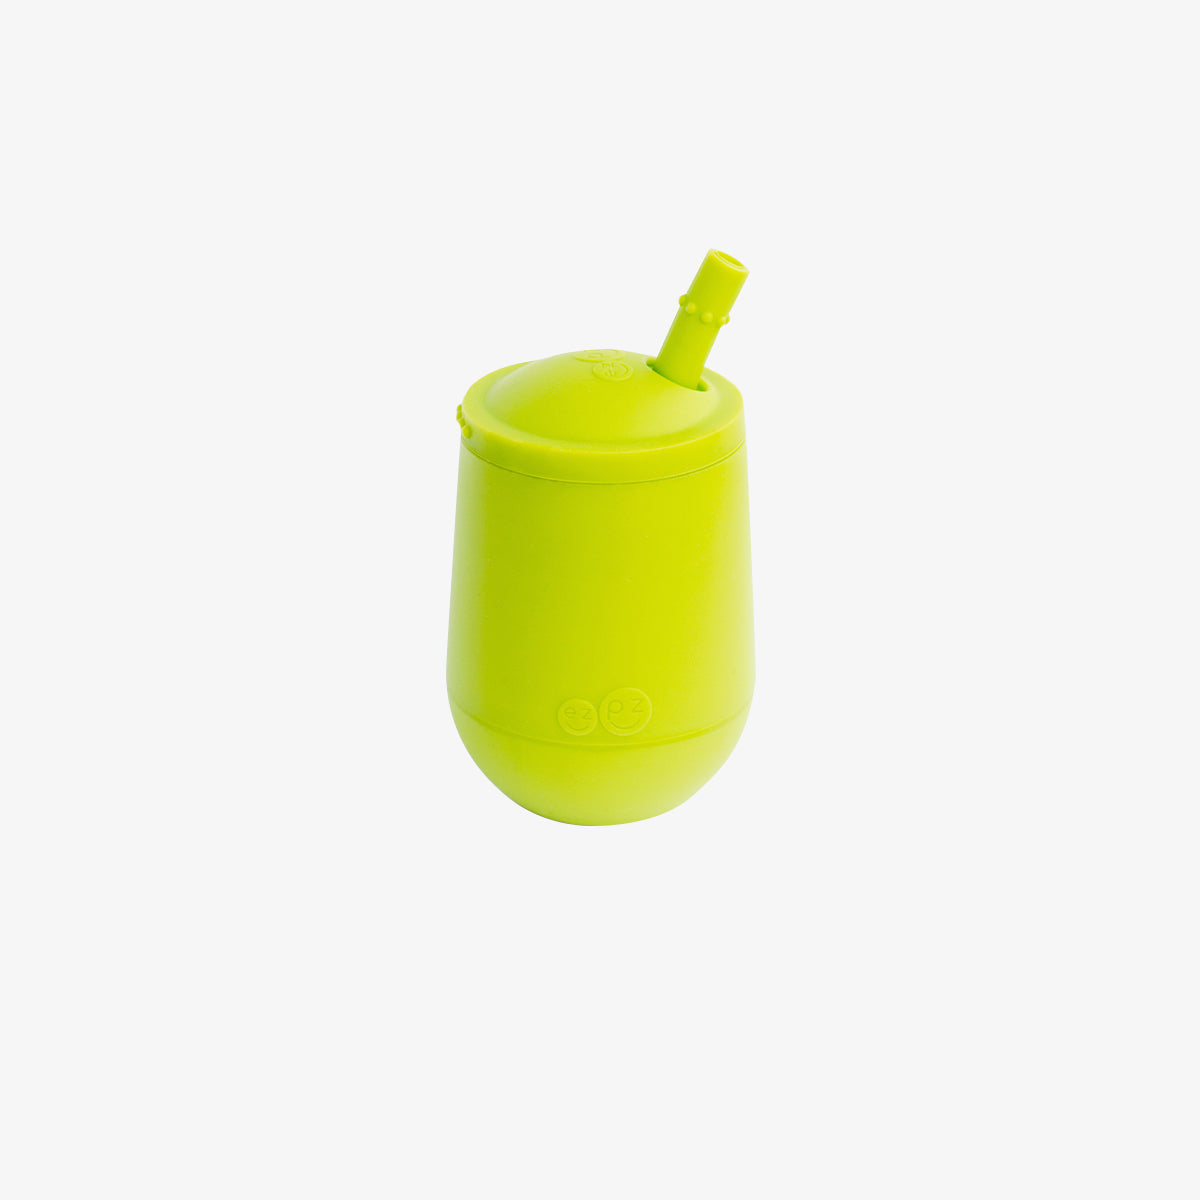 The Mini Cup + Straw in Lime by ezpz / Silicone Drinking Cup and Straw Training System for Toddlers